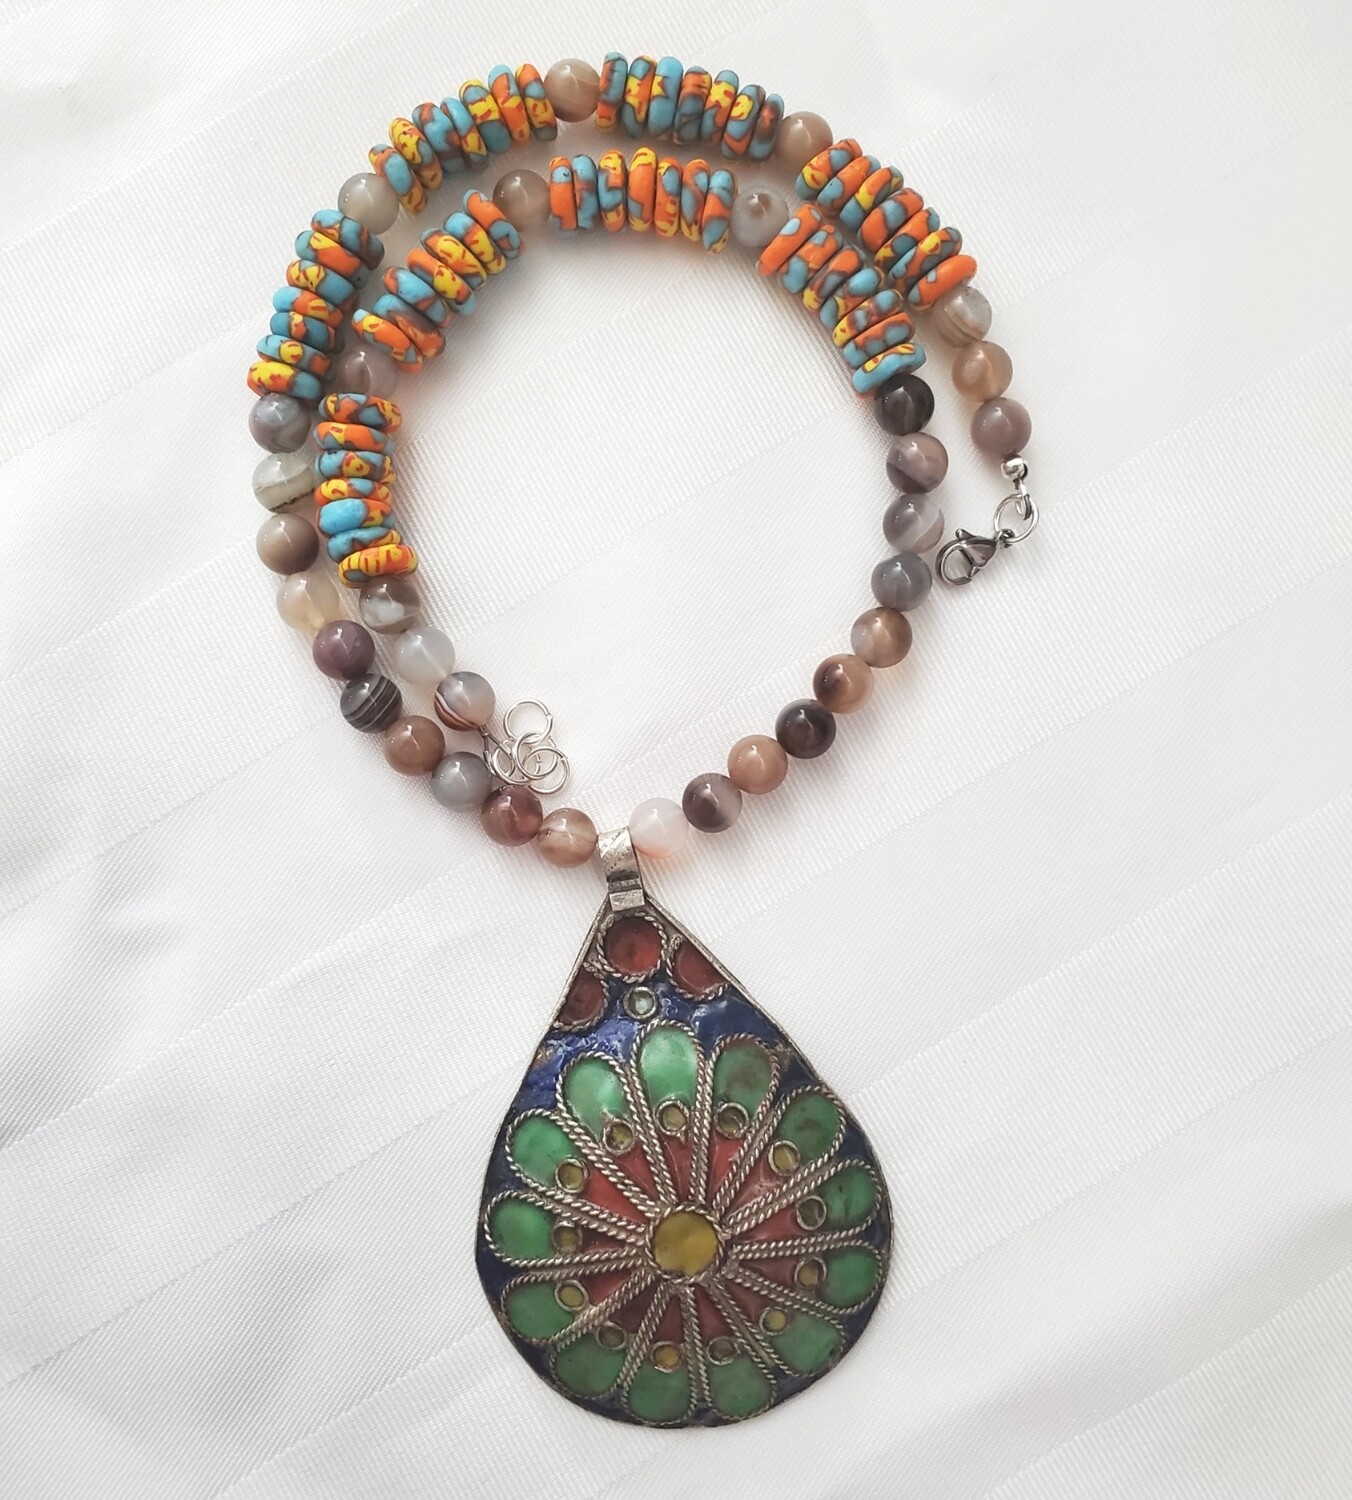 Botswana Agate and Recycled Glass Handmade Beaded Necklace With Vintage Moroccan Pendant